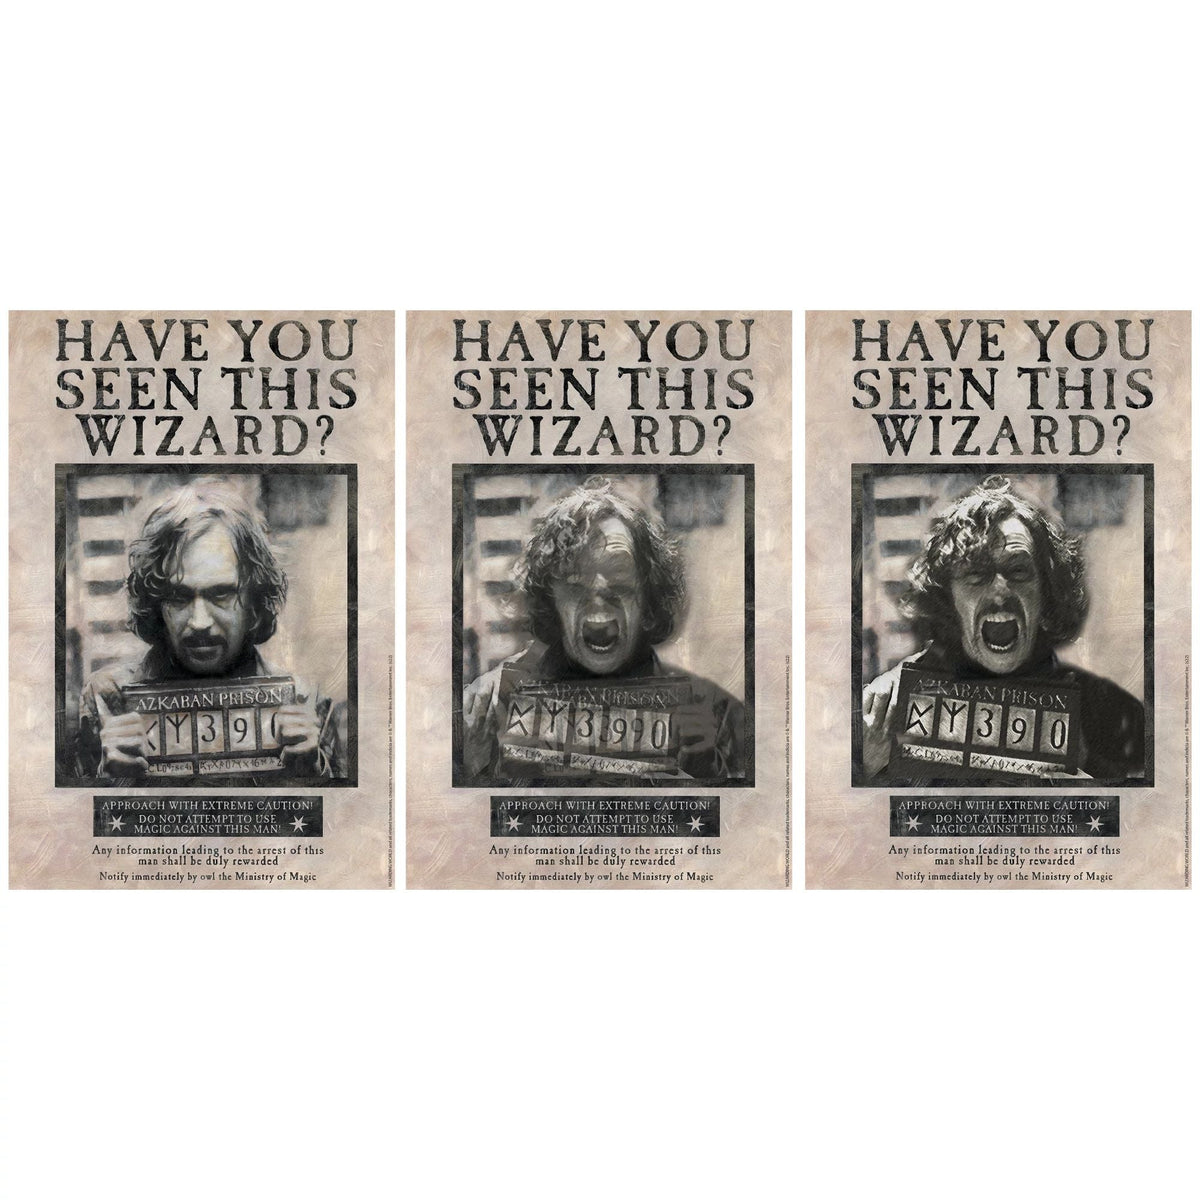 AMSCAN CA Halloween Harry Potter Sirius Black Wanted Lenticular Poster, 18 x 12 Inches, 1 Count